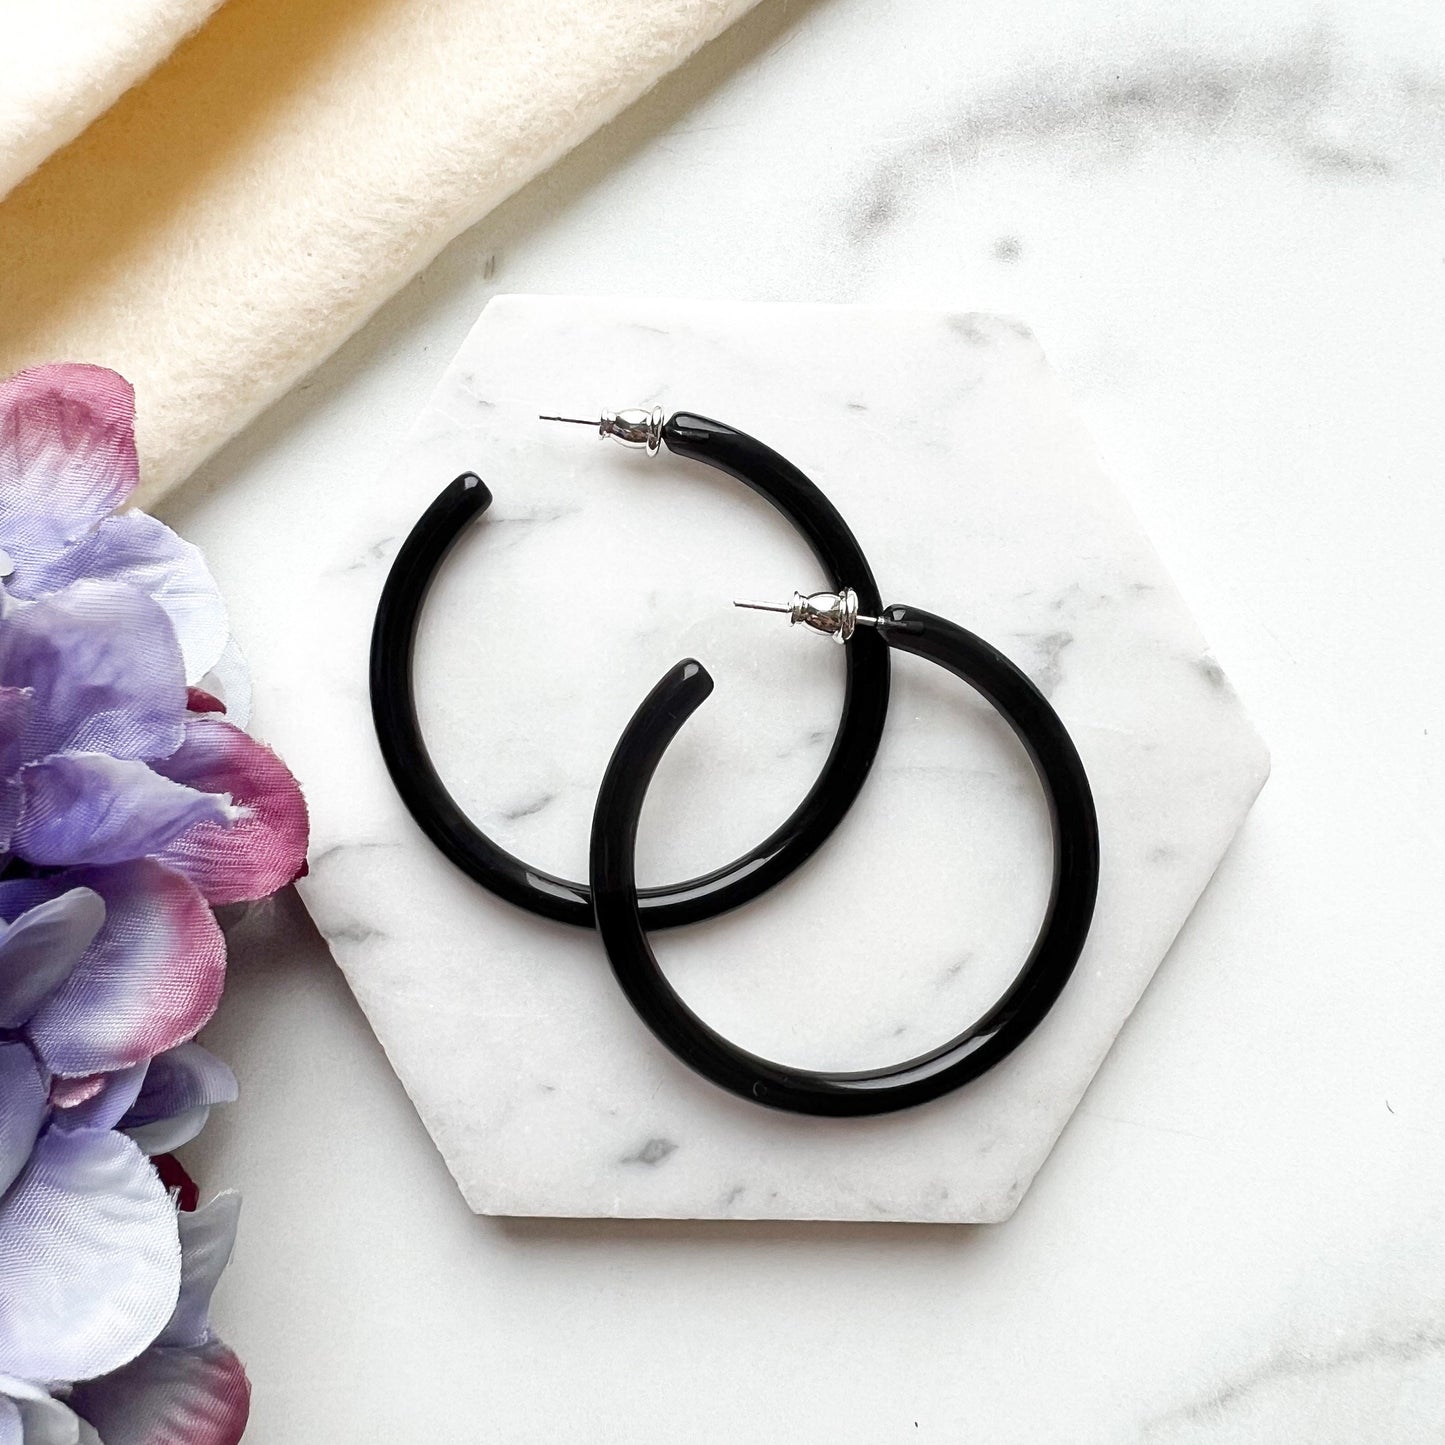 NEW COLORS! 50mm Thin Round Hoops | Large Hoop Earrings Cellulose Acetate 925 Sterling Silver Posts